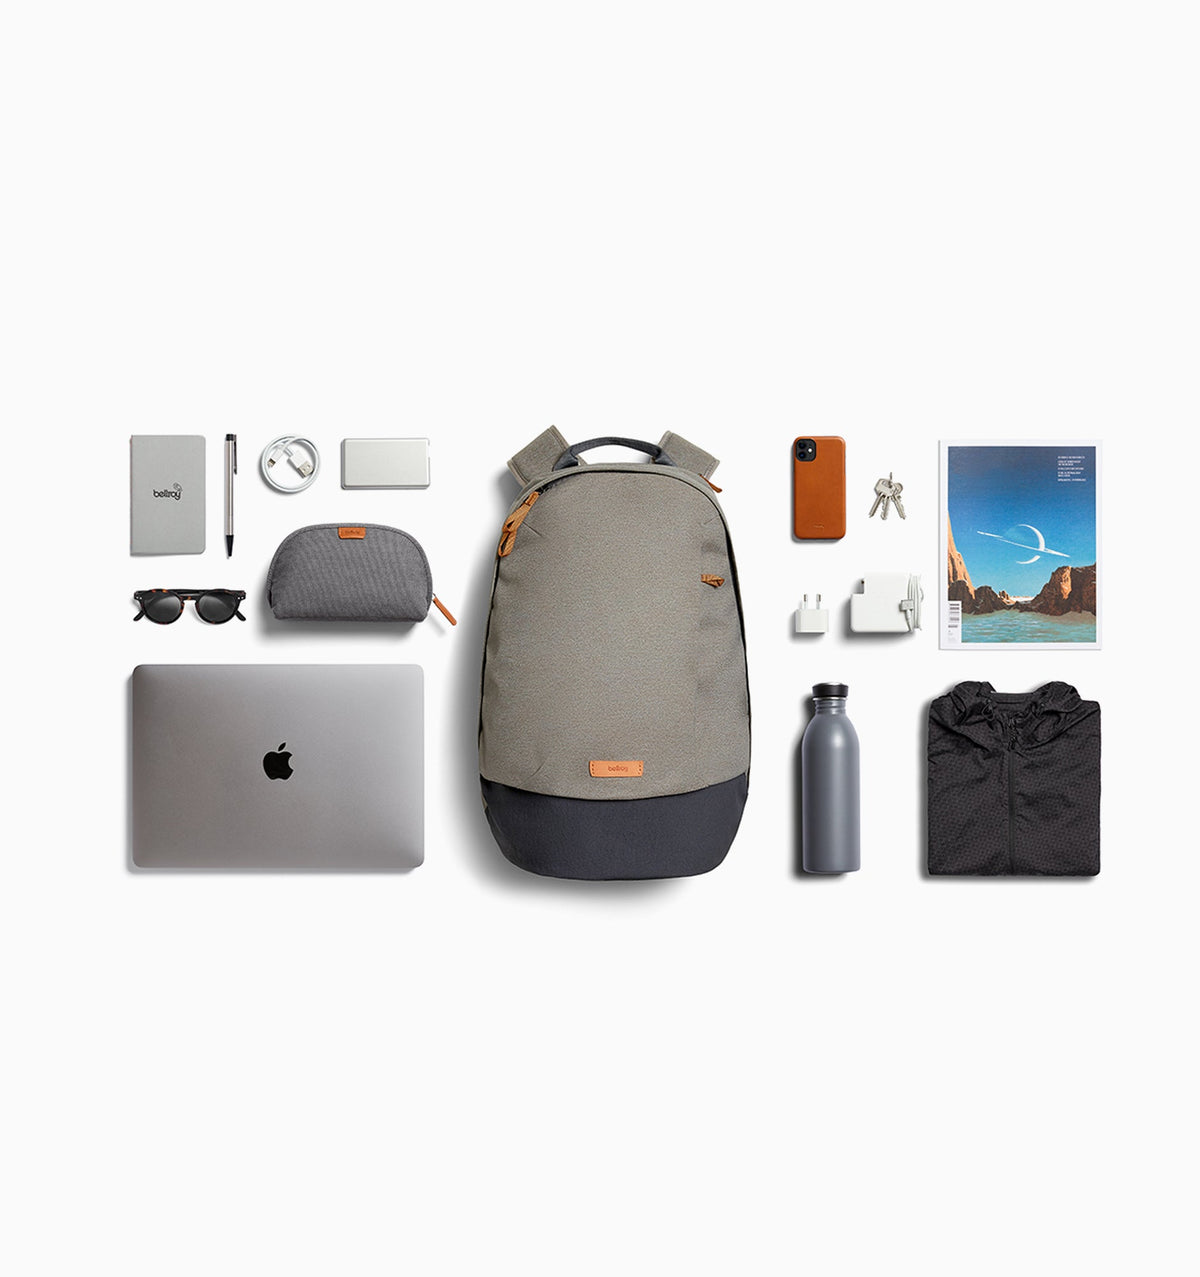 Bellroy Classic 16" Laptop Backpack (Second Edition) - Limestone